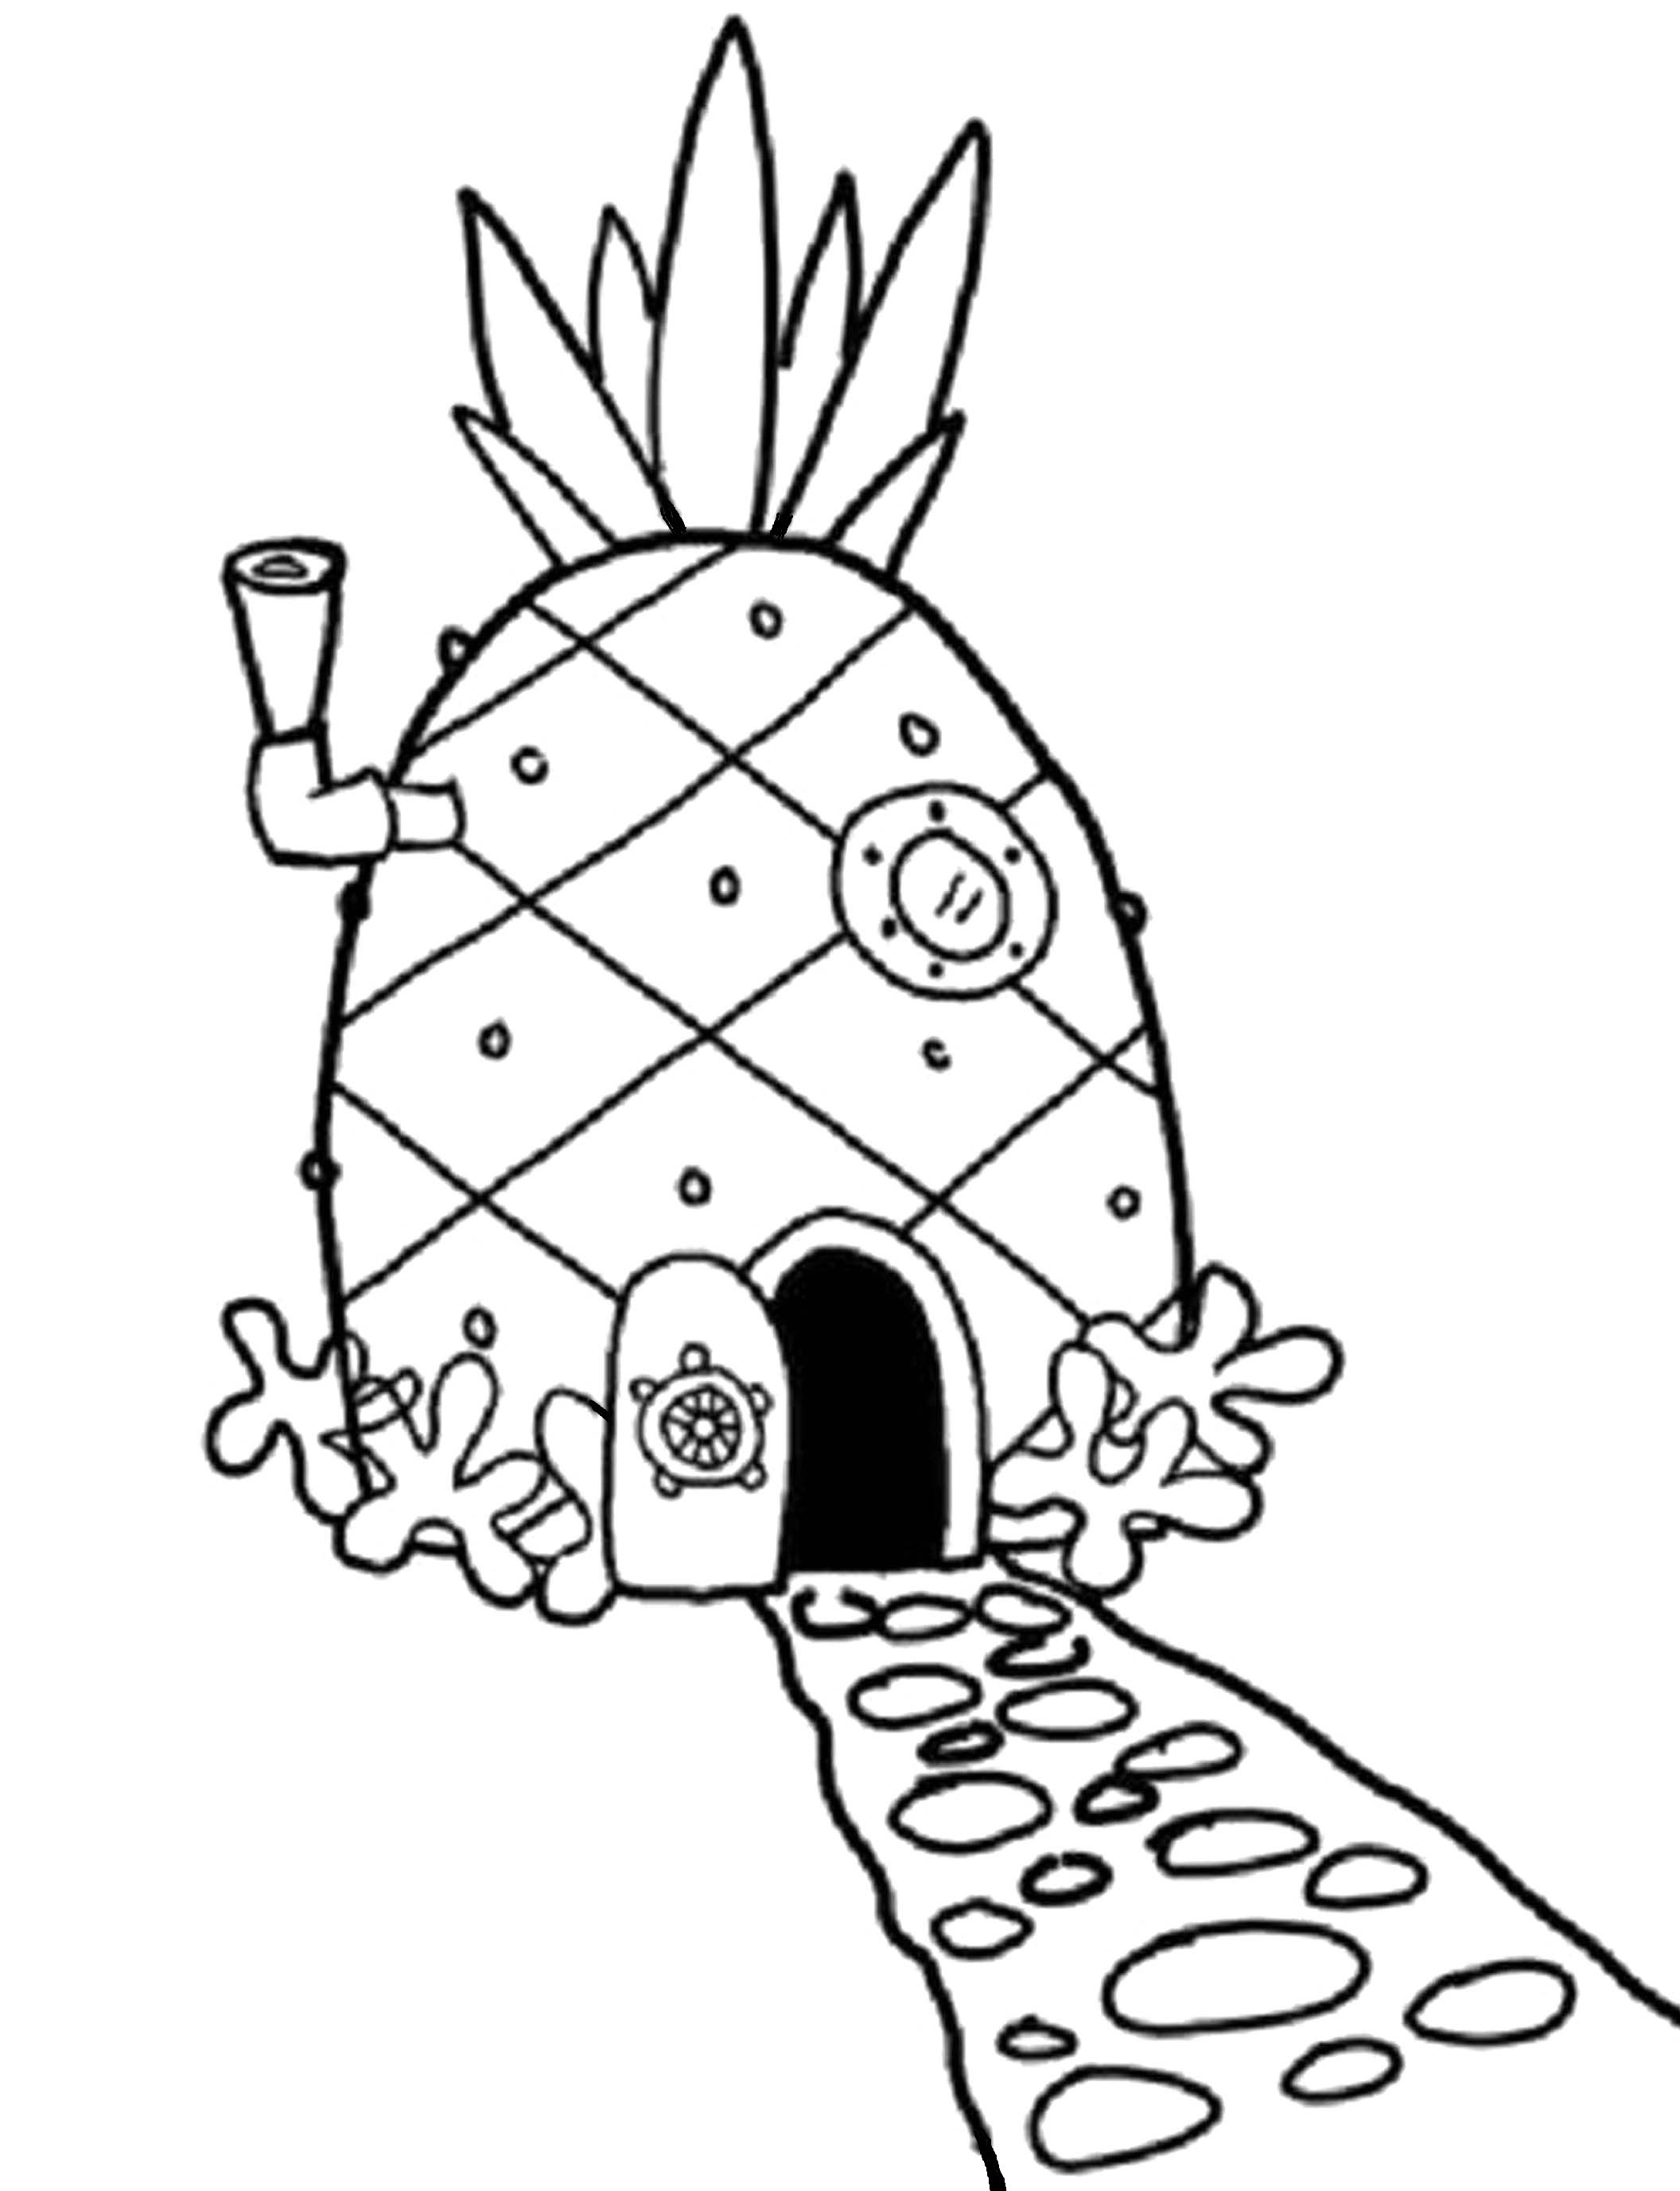 Wealth Spongebob Squarepants House Coloring Pages And Squidward For Kids Luxury